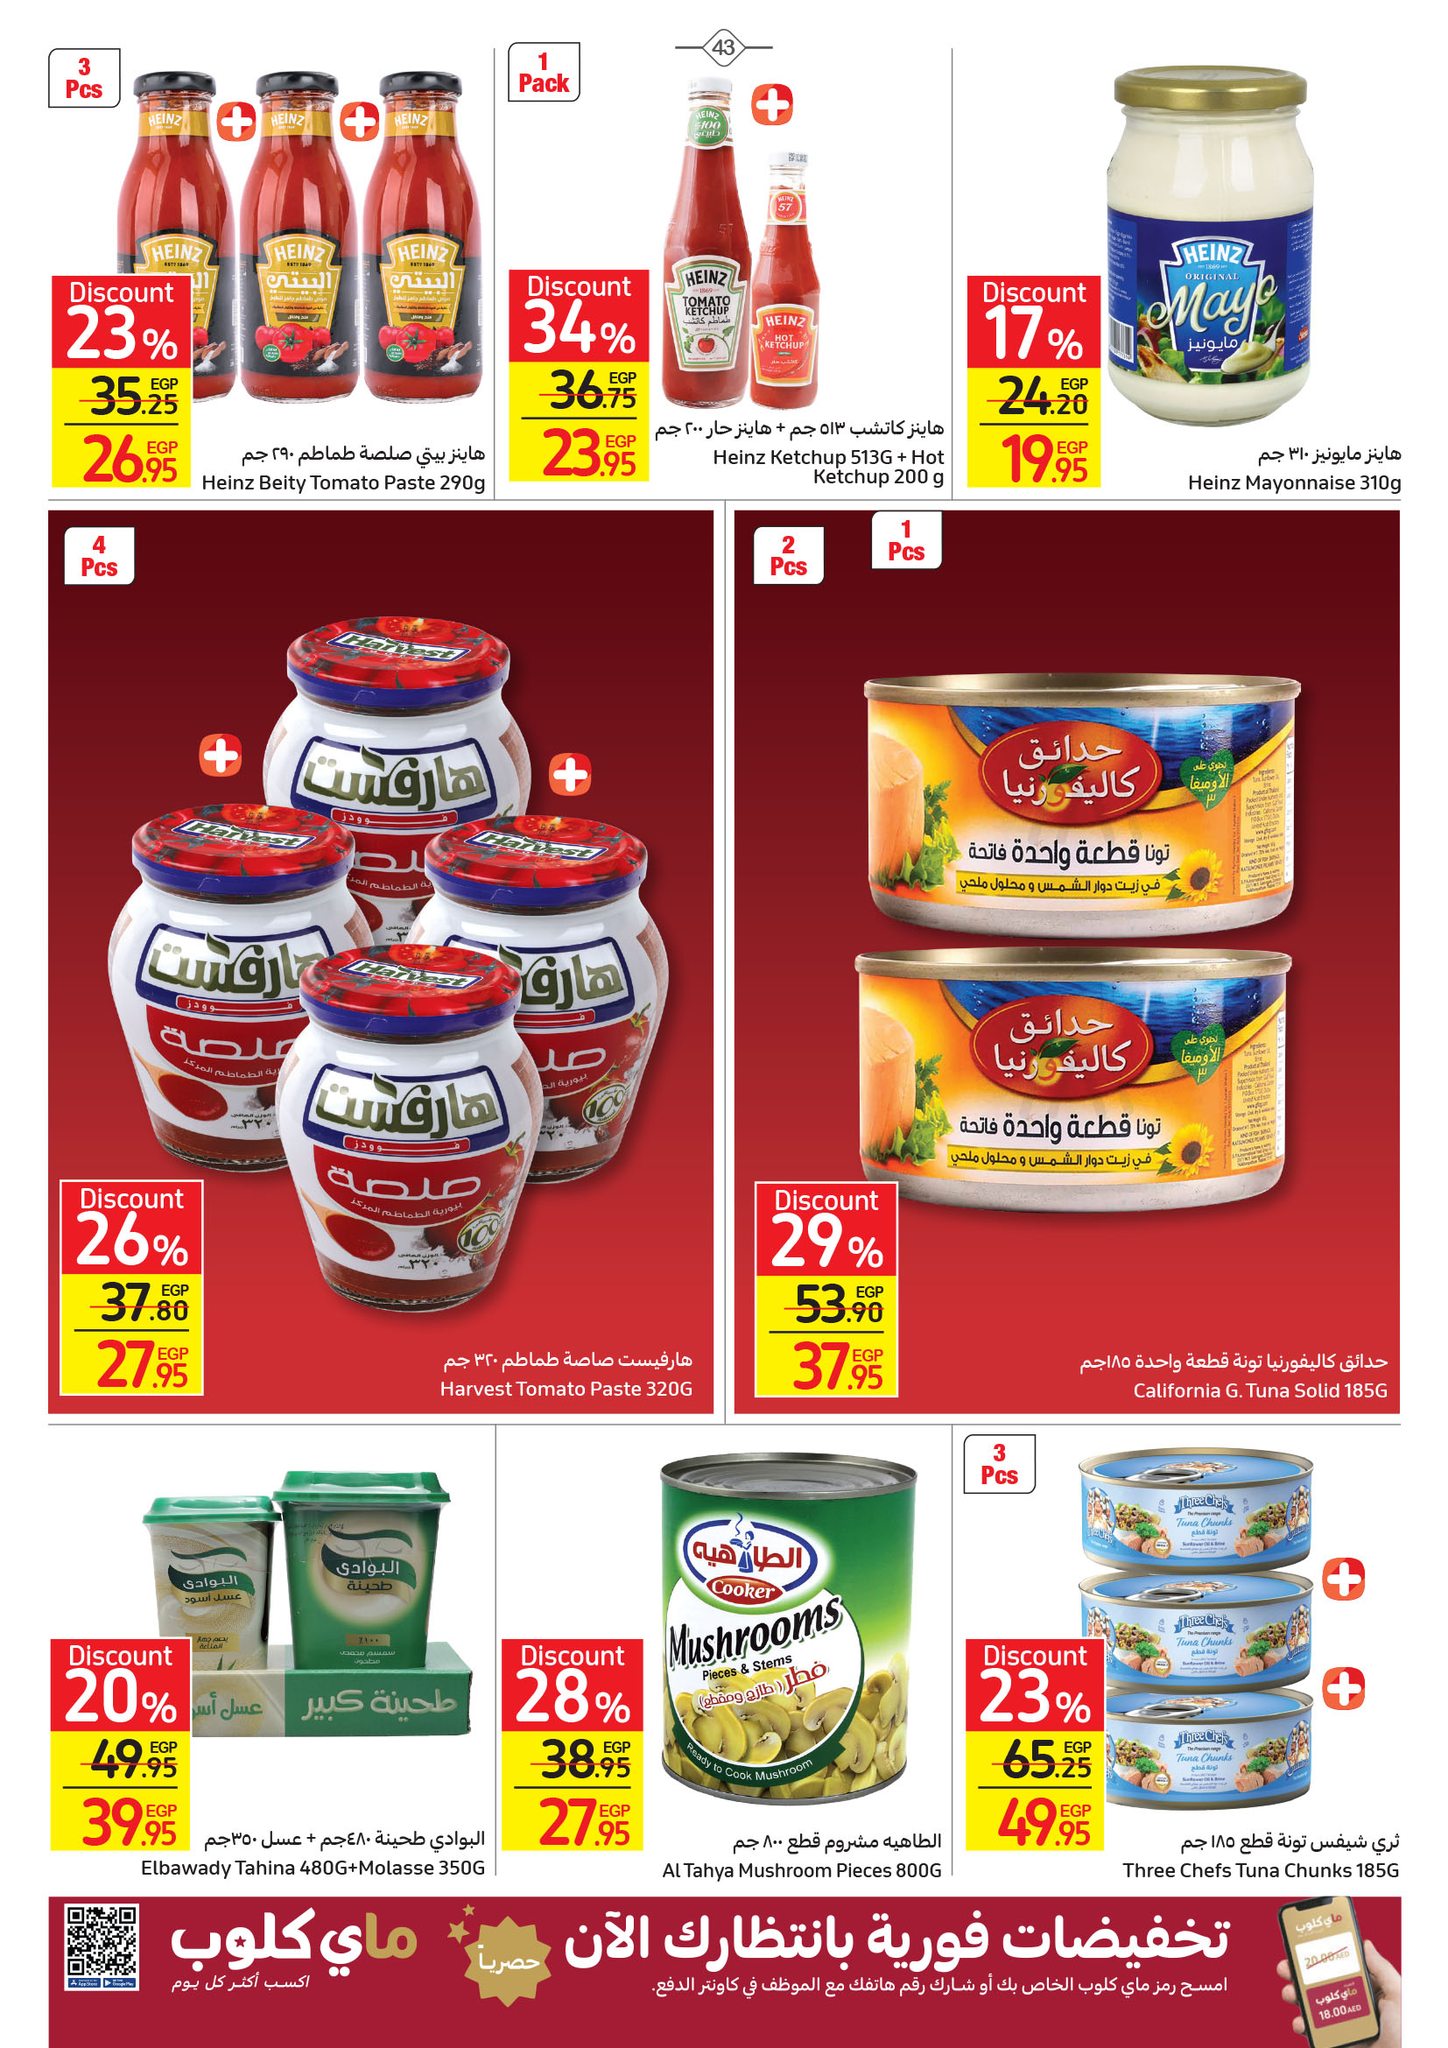 Watch the latest Carrefour half price offers "Last Chance Offer" until December 4th 43